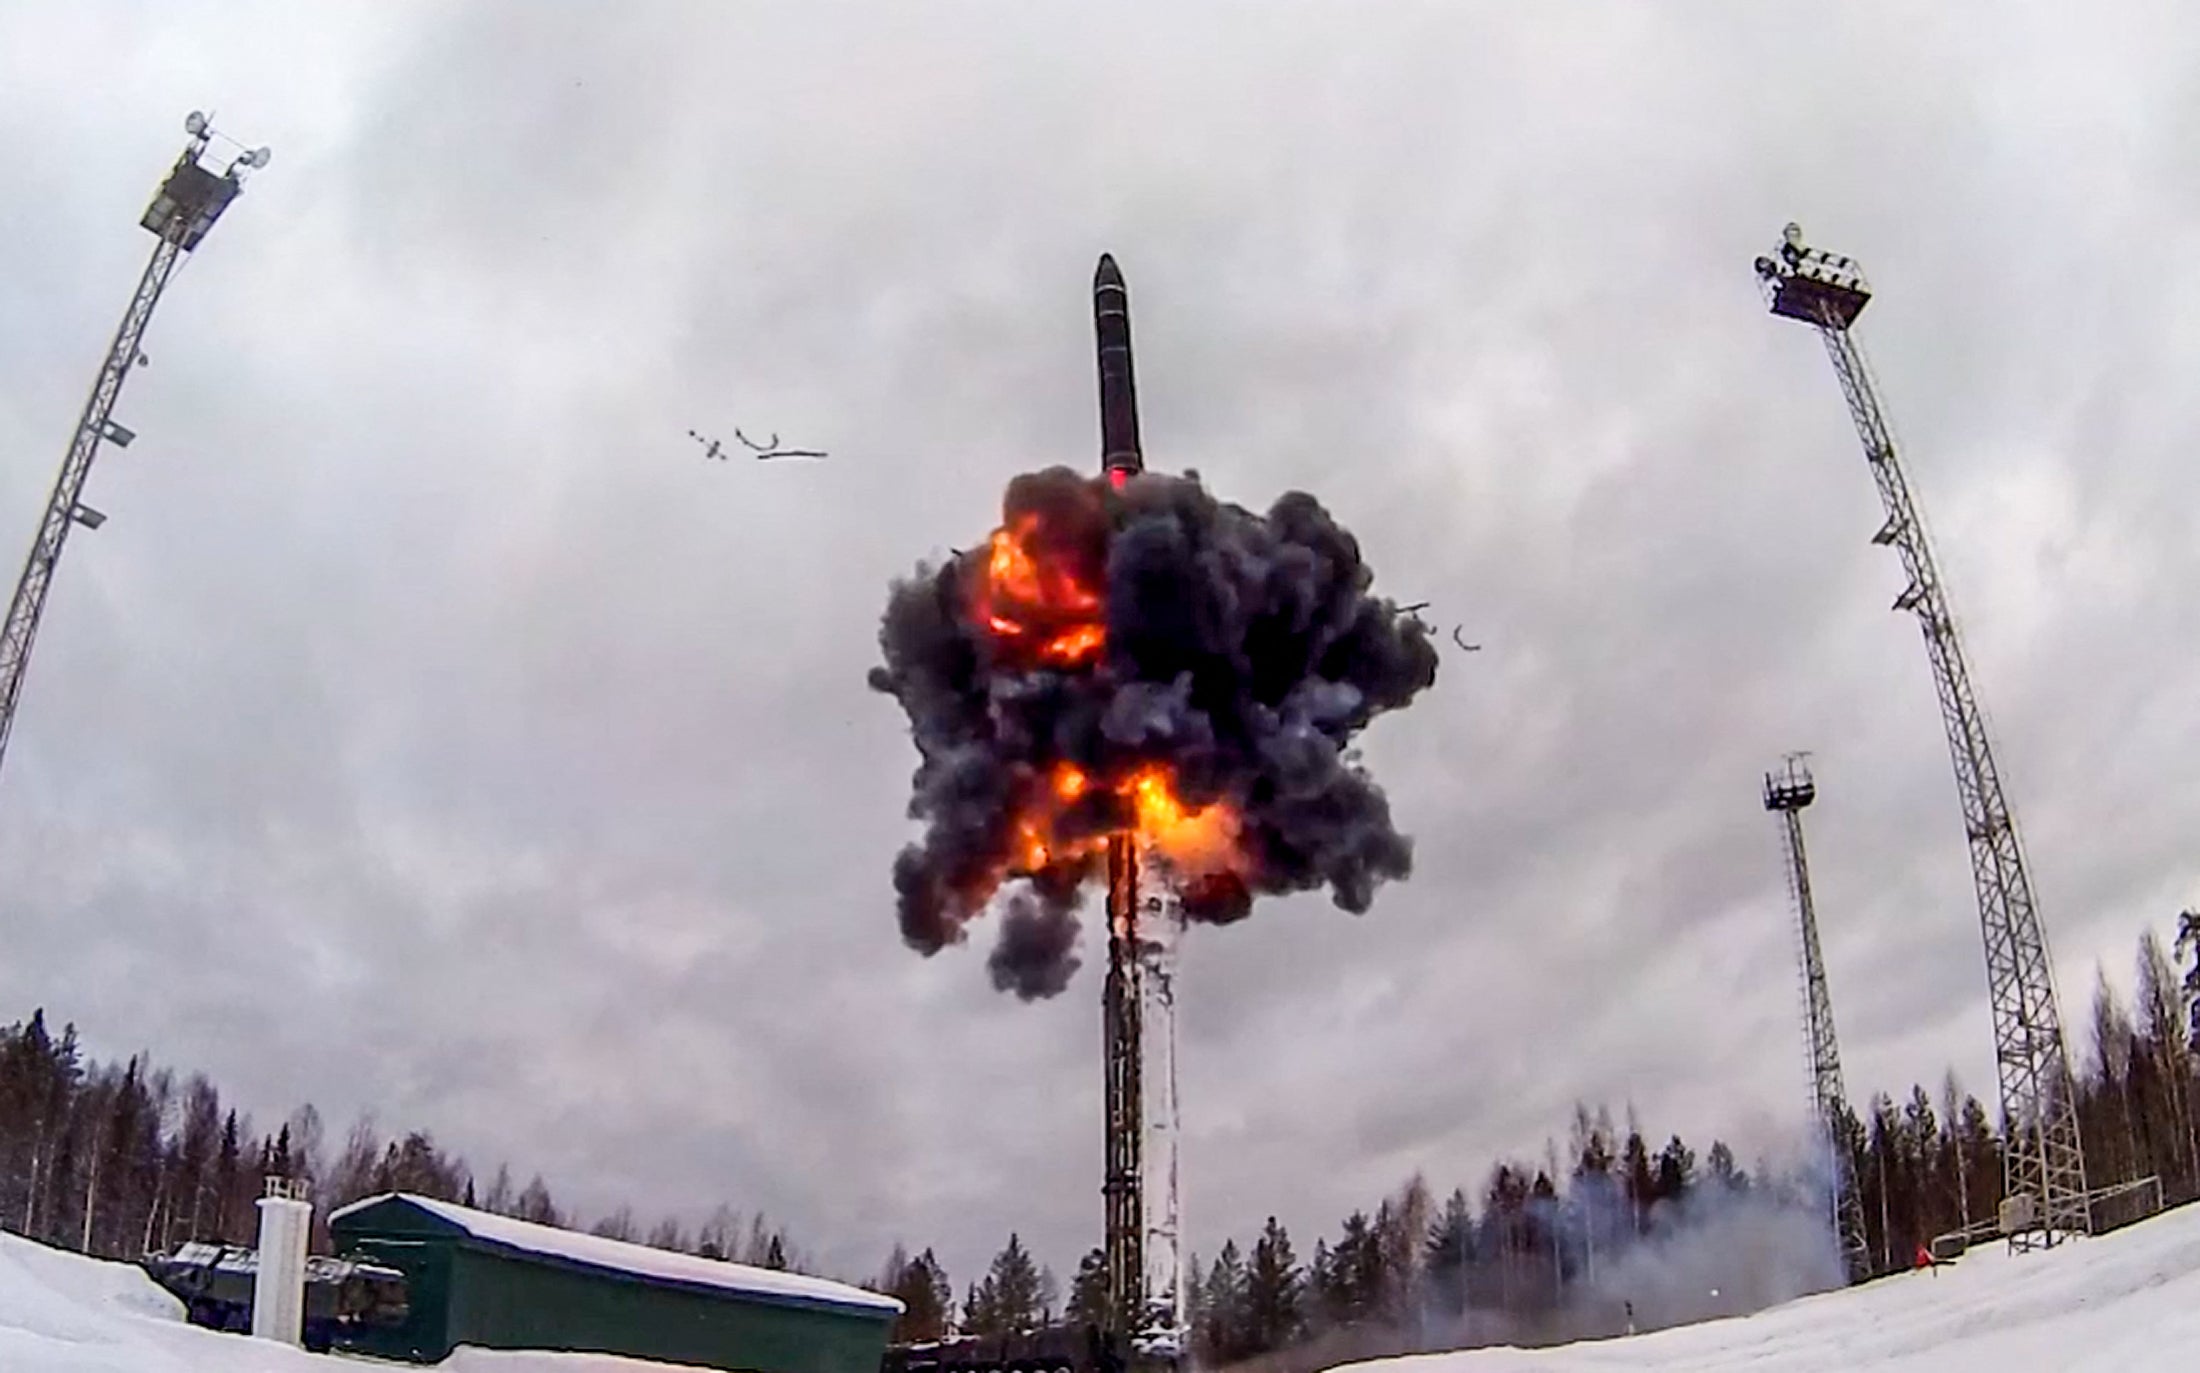 This image released by the Russian Defence Ministry shows a ballistic missile launching during a training exercise at an undefined location in Russia